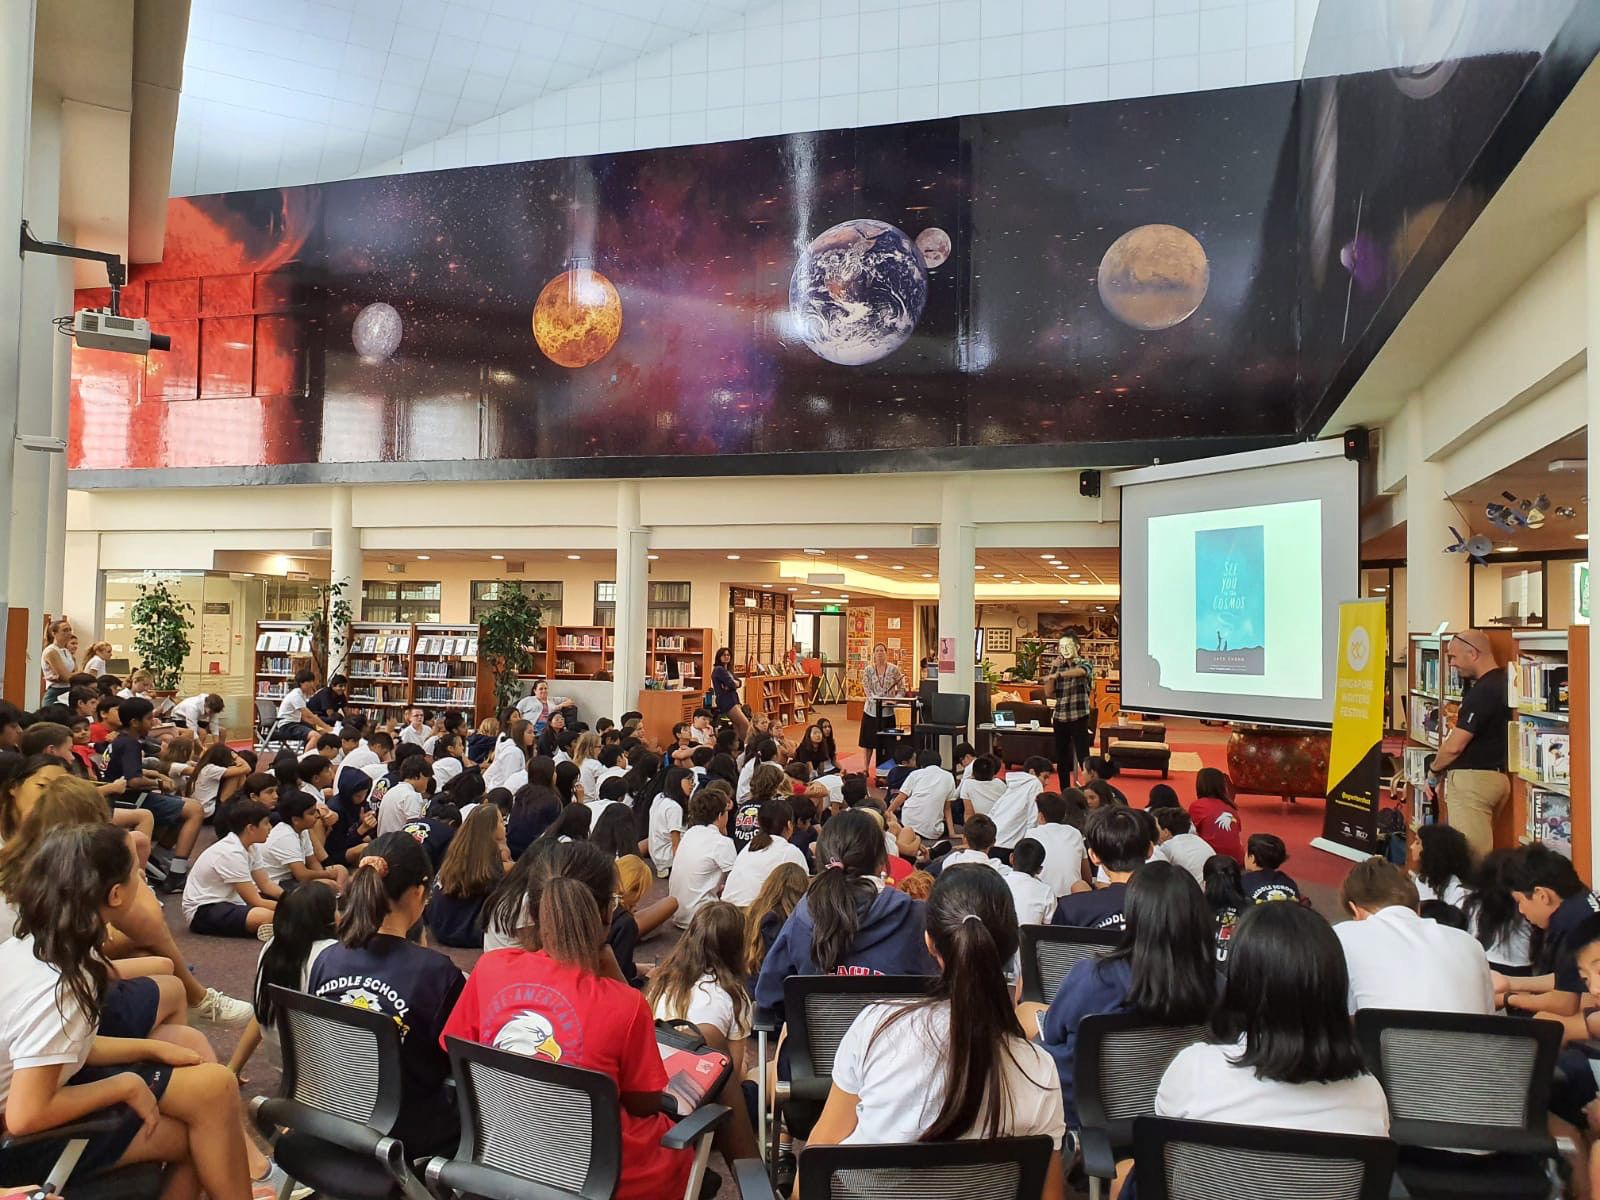 My See You in the Cosmos presentation at a school in Singapore